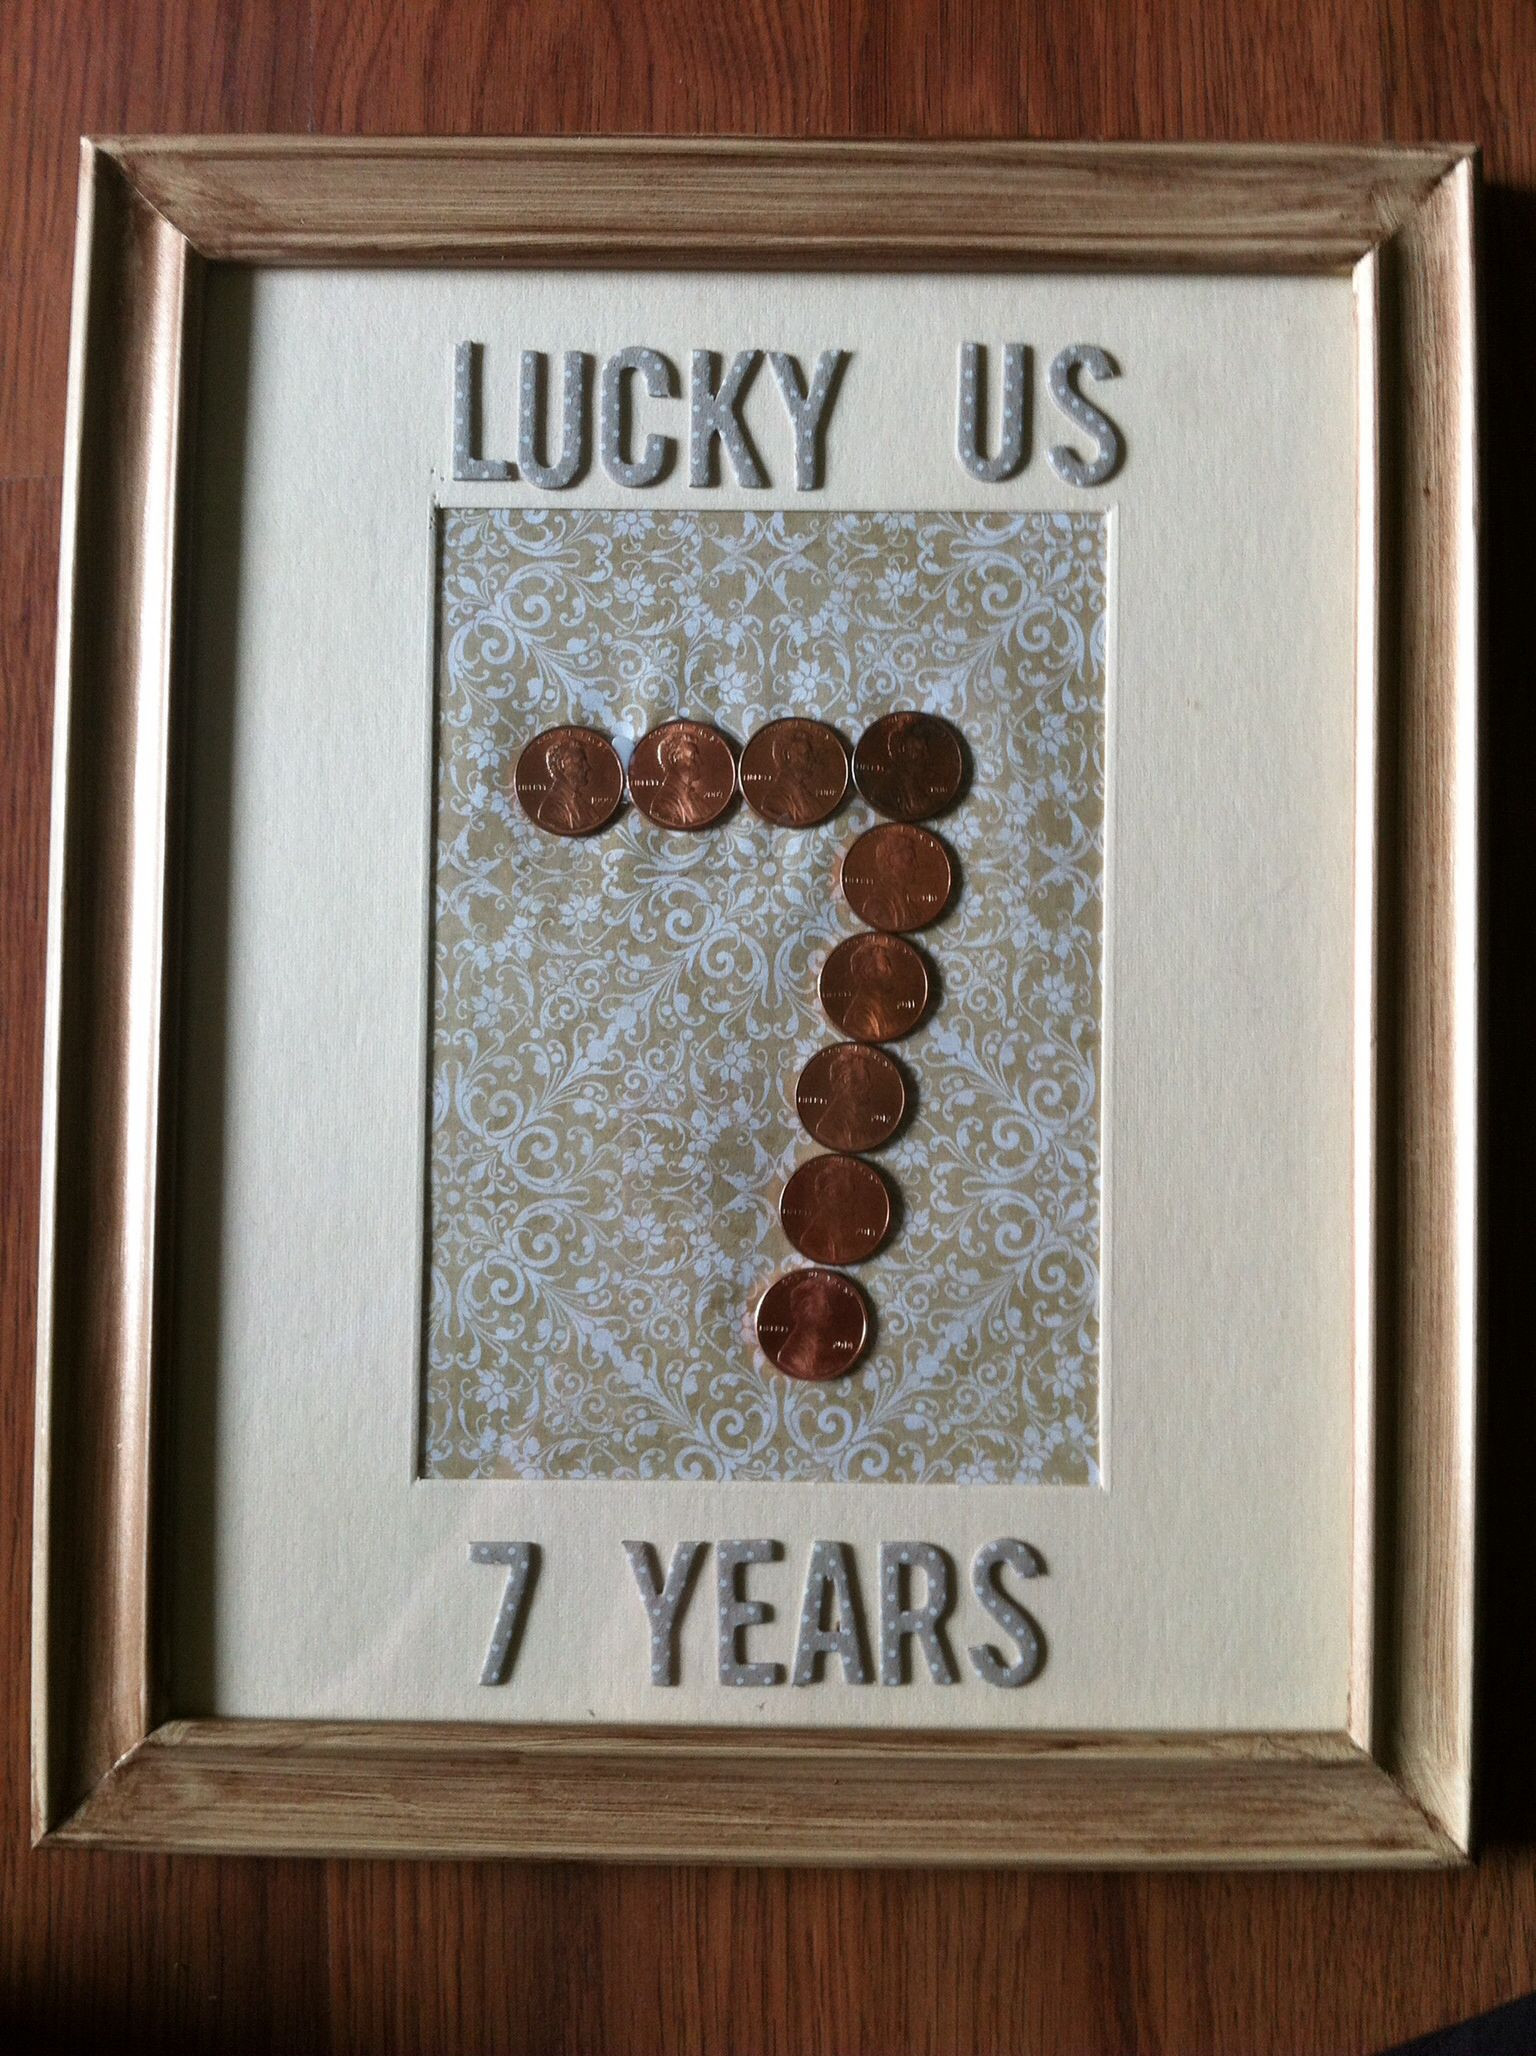 7 Year Anniversary Copper Gift Ideas
 7 year anniversary the "copper" year A penny for every